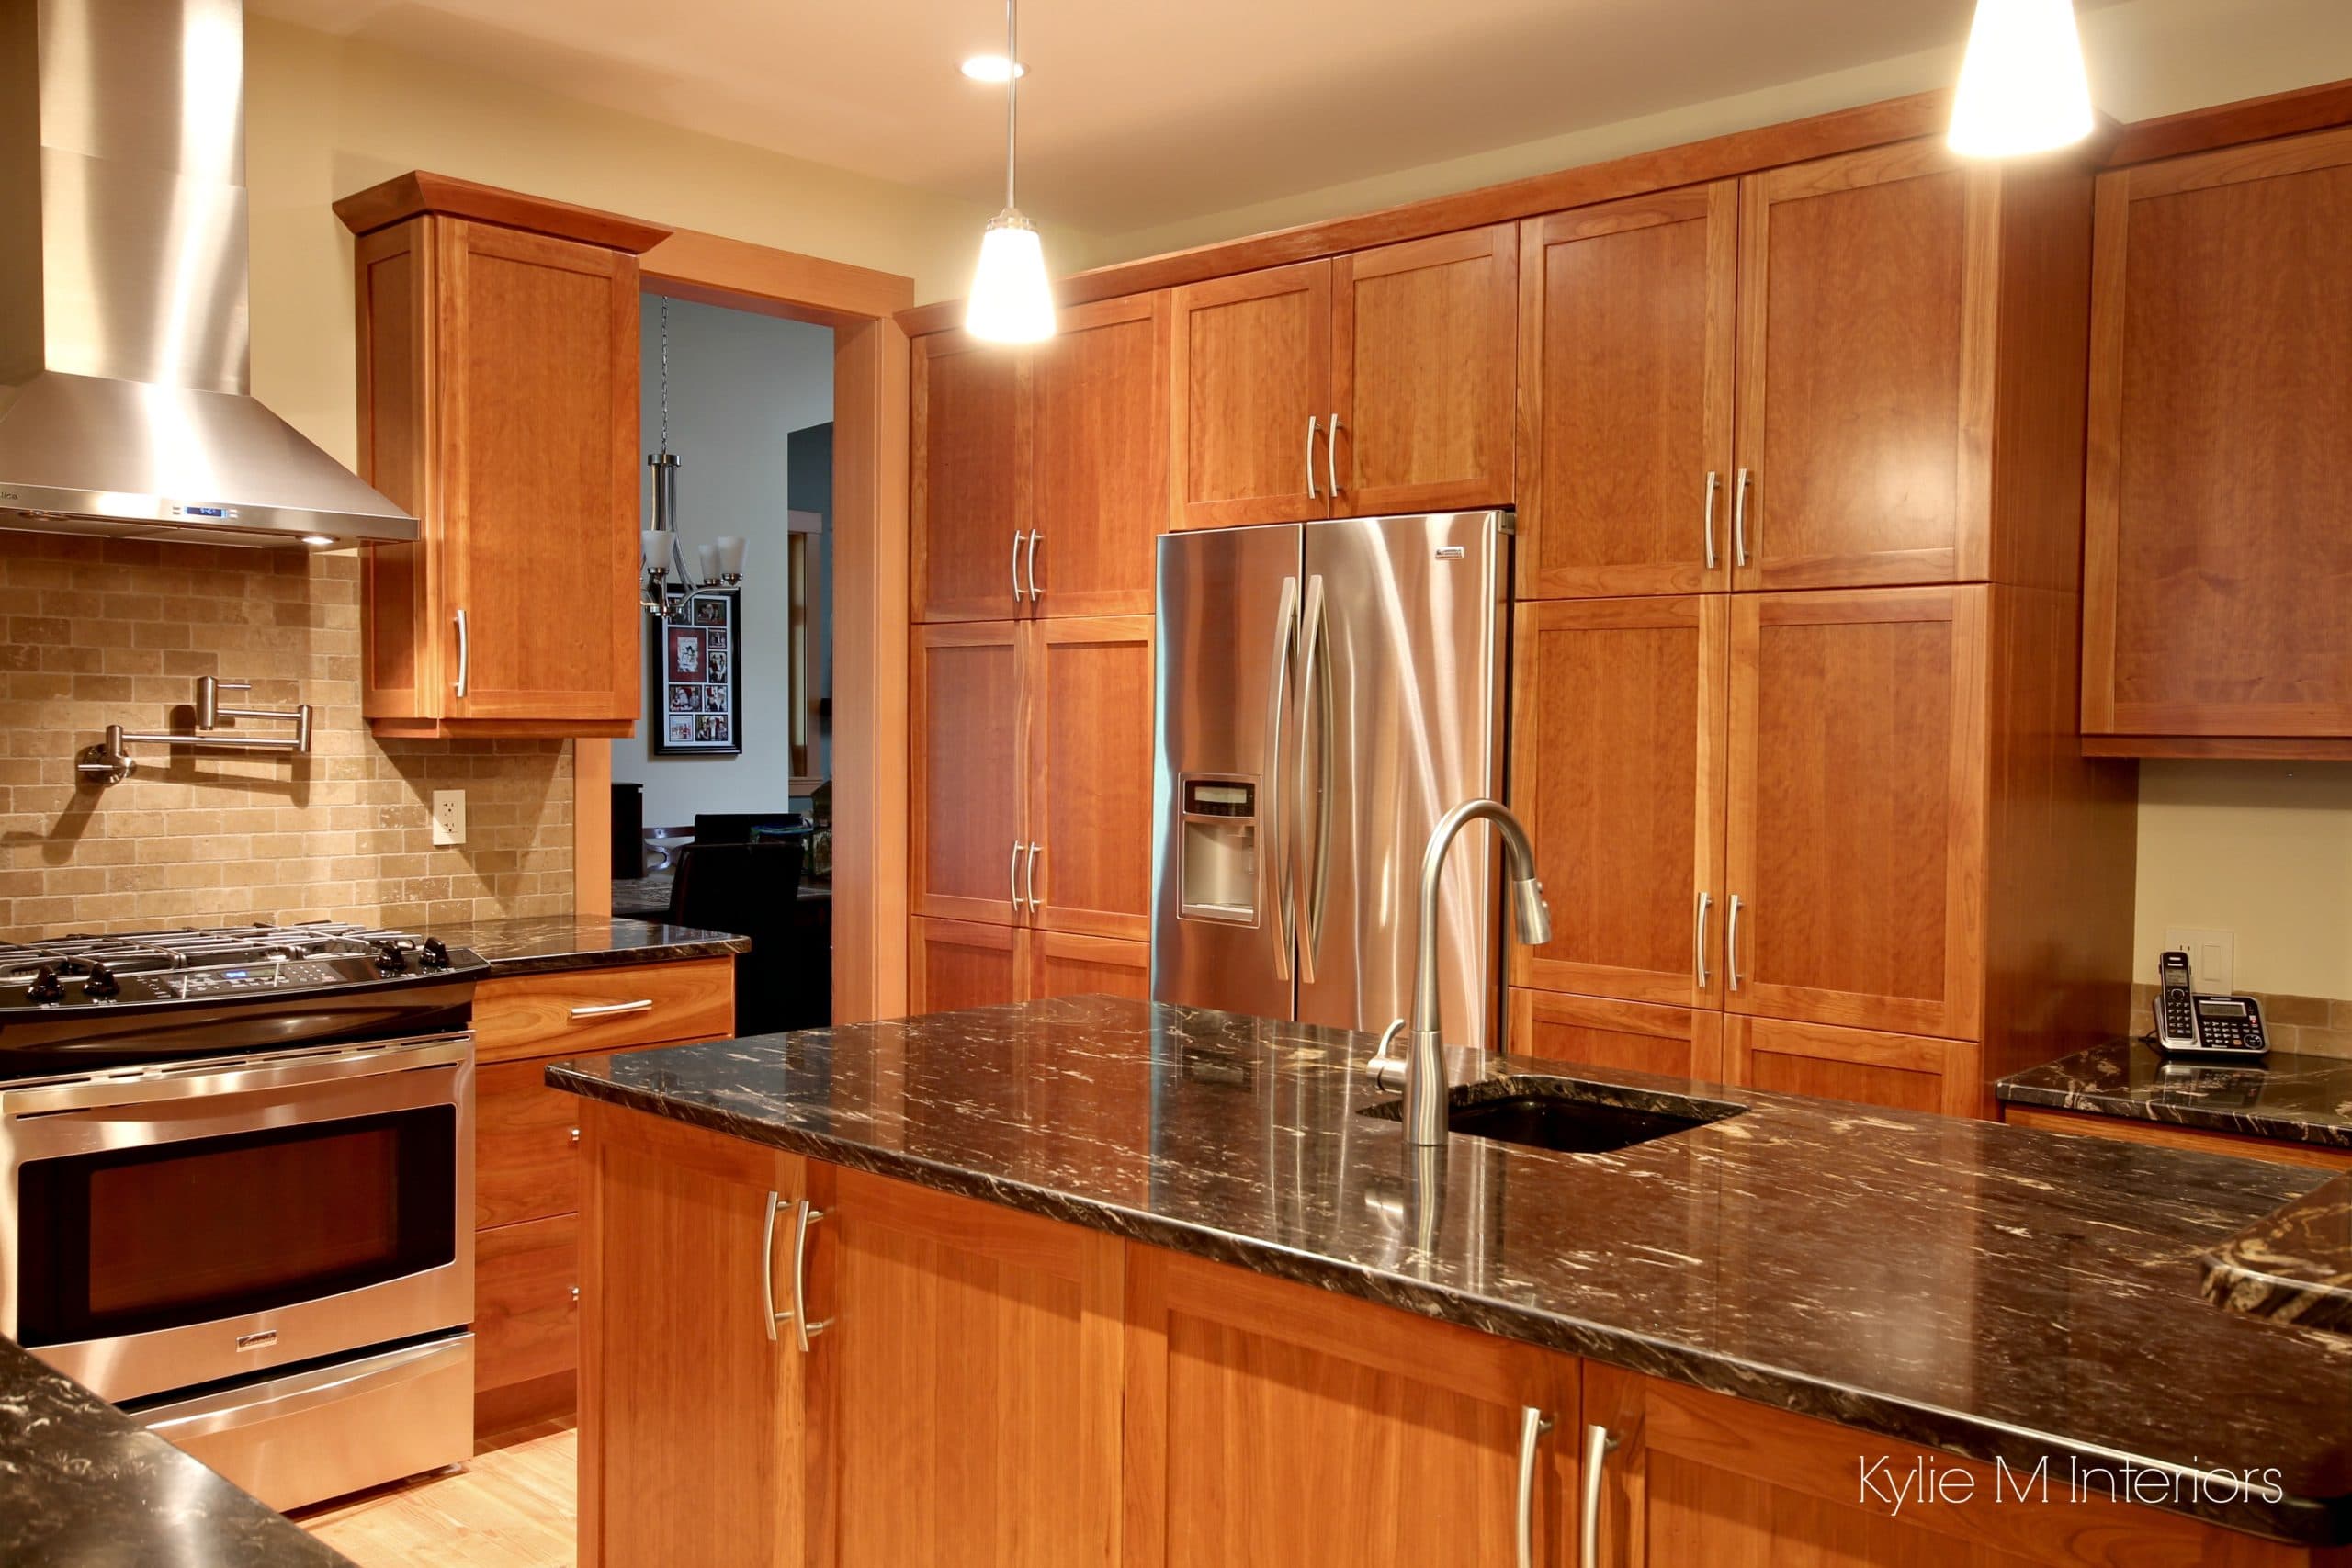 Cherry Kitchen Cabinets Wall Color - What Paint Colors Look Best With